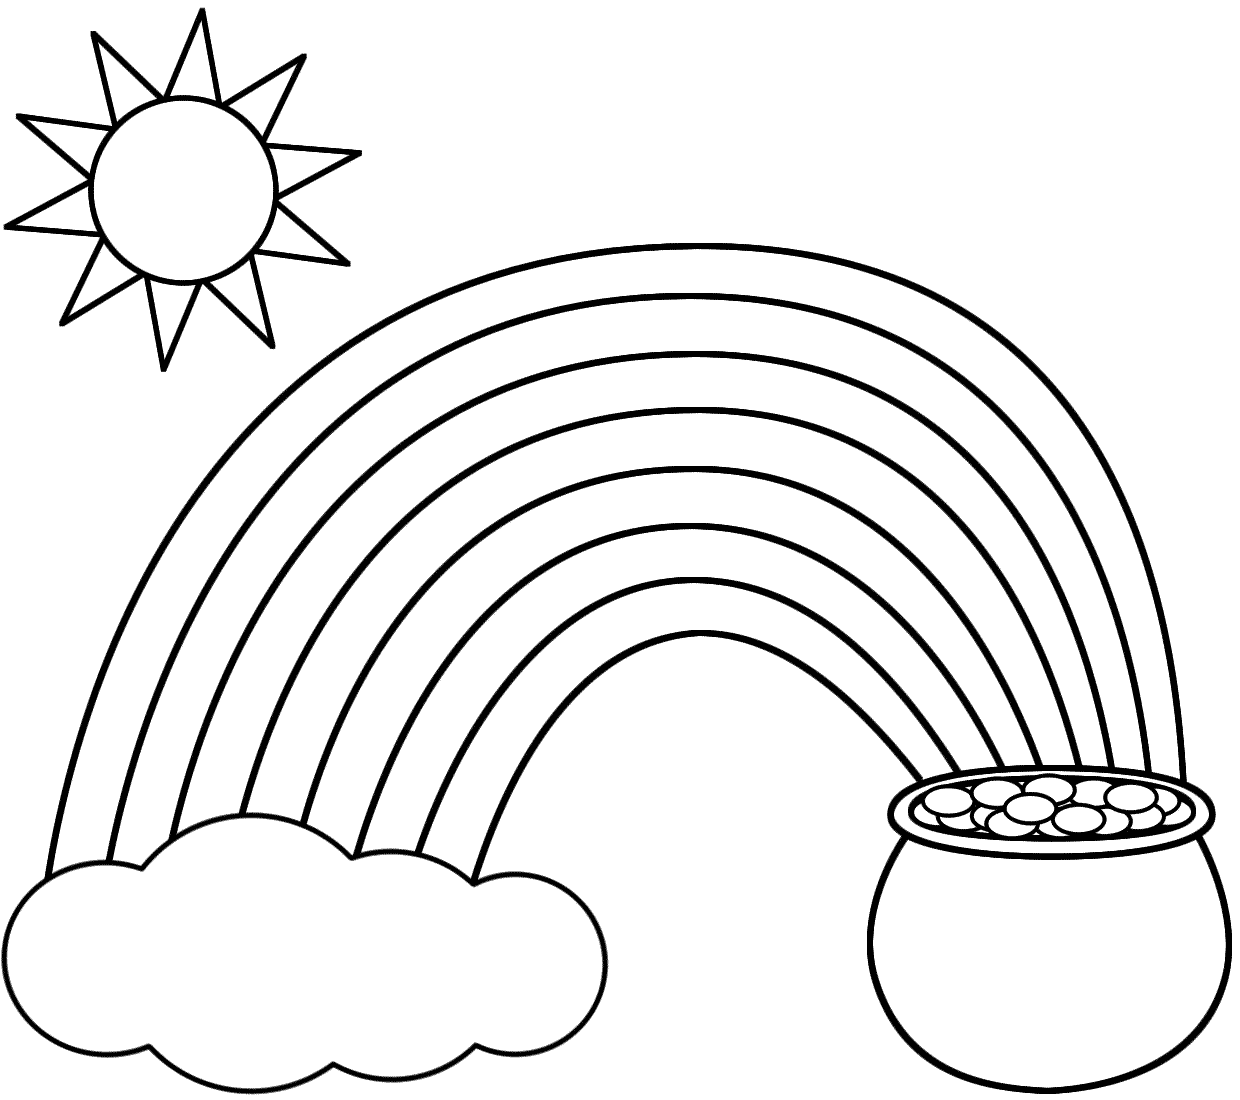 Pot of Gold Rainbow Coloring Page